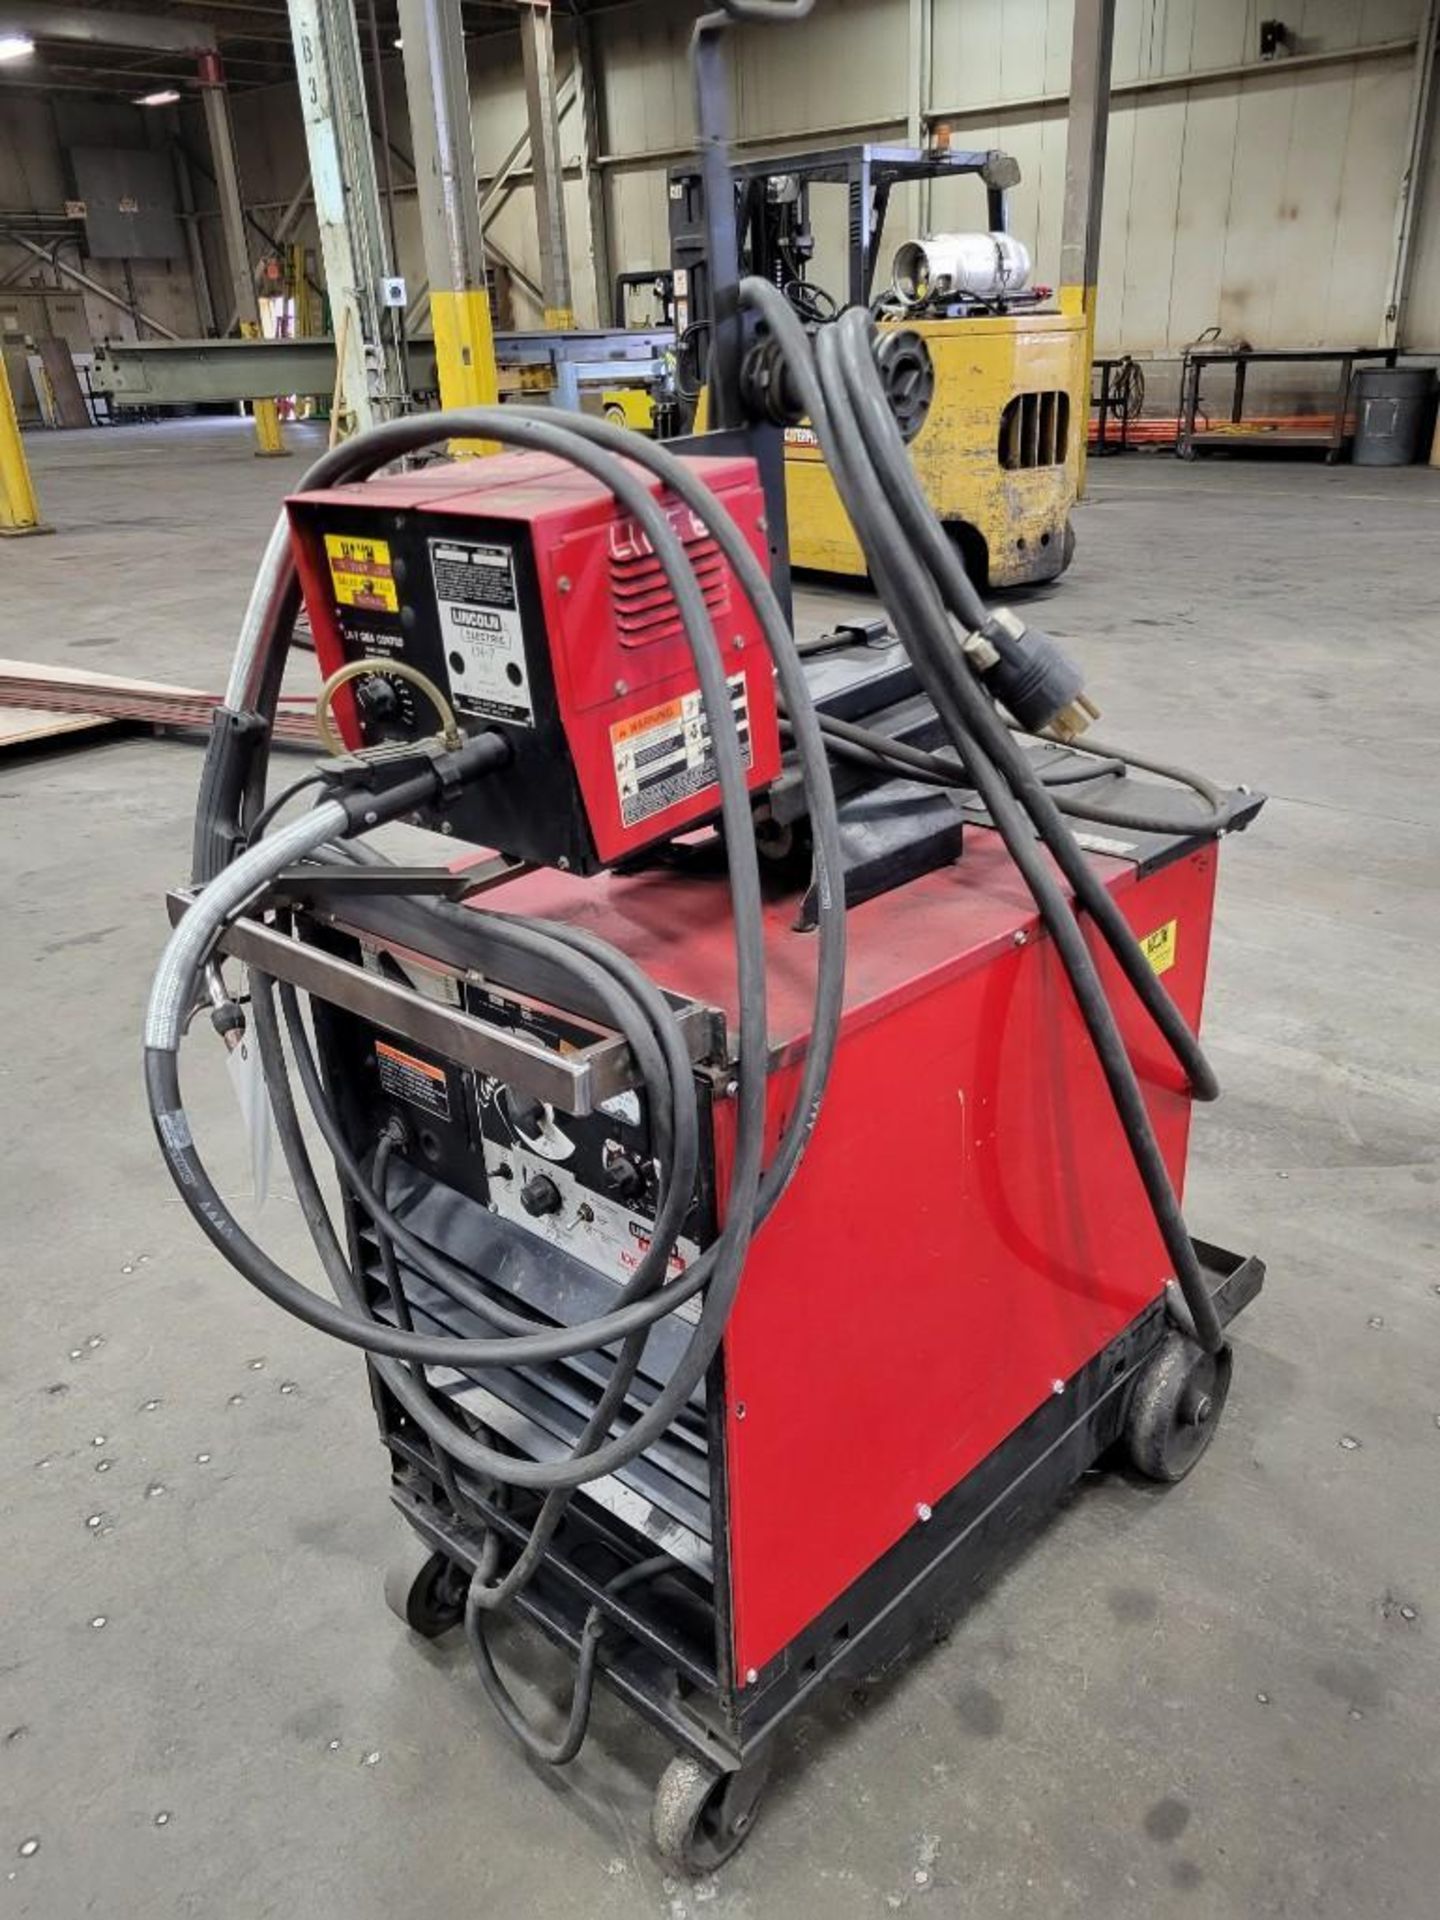 LINCOLN ELECTRIC IDEALARC DC-400 MULTIPROCESS WELDER WITH LN-7 WIRE FEEDER - Image 4 of 10